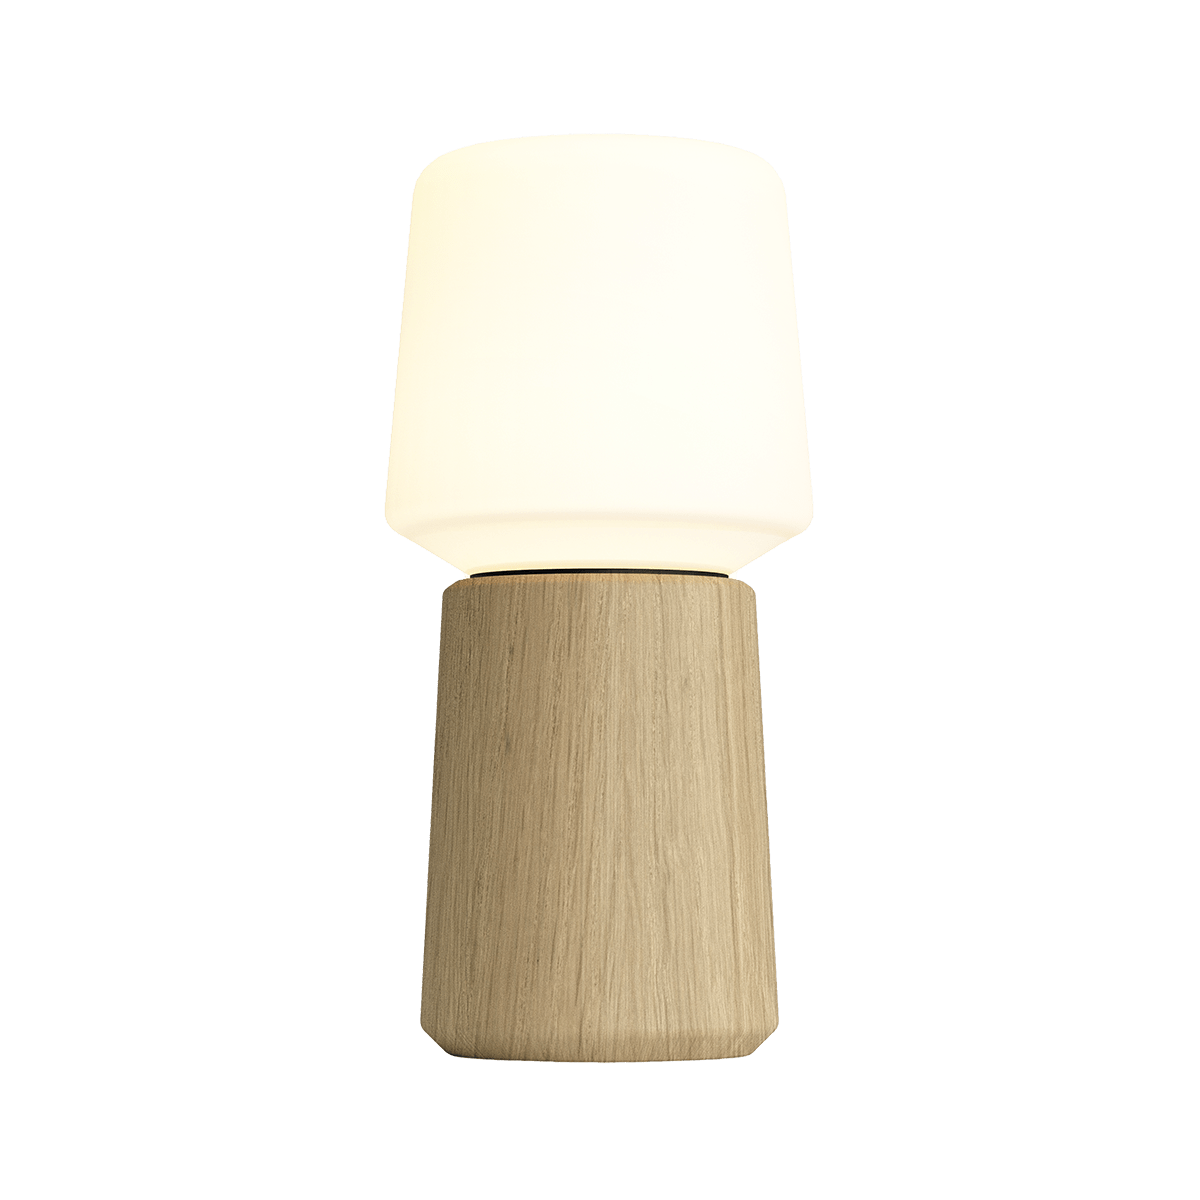 variant_600232% | Ambience - Lamp Intelligent + Oslo base [Contract] - Natural Oak 10 | SACKit